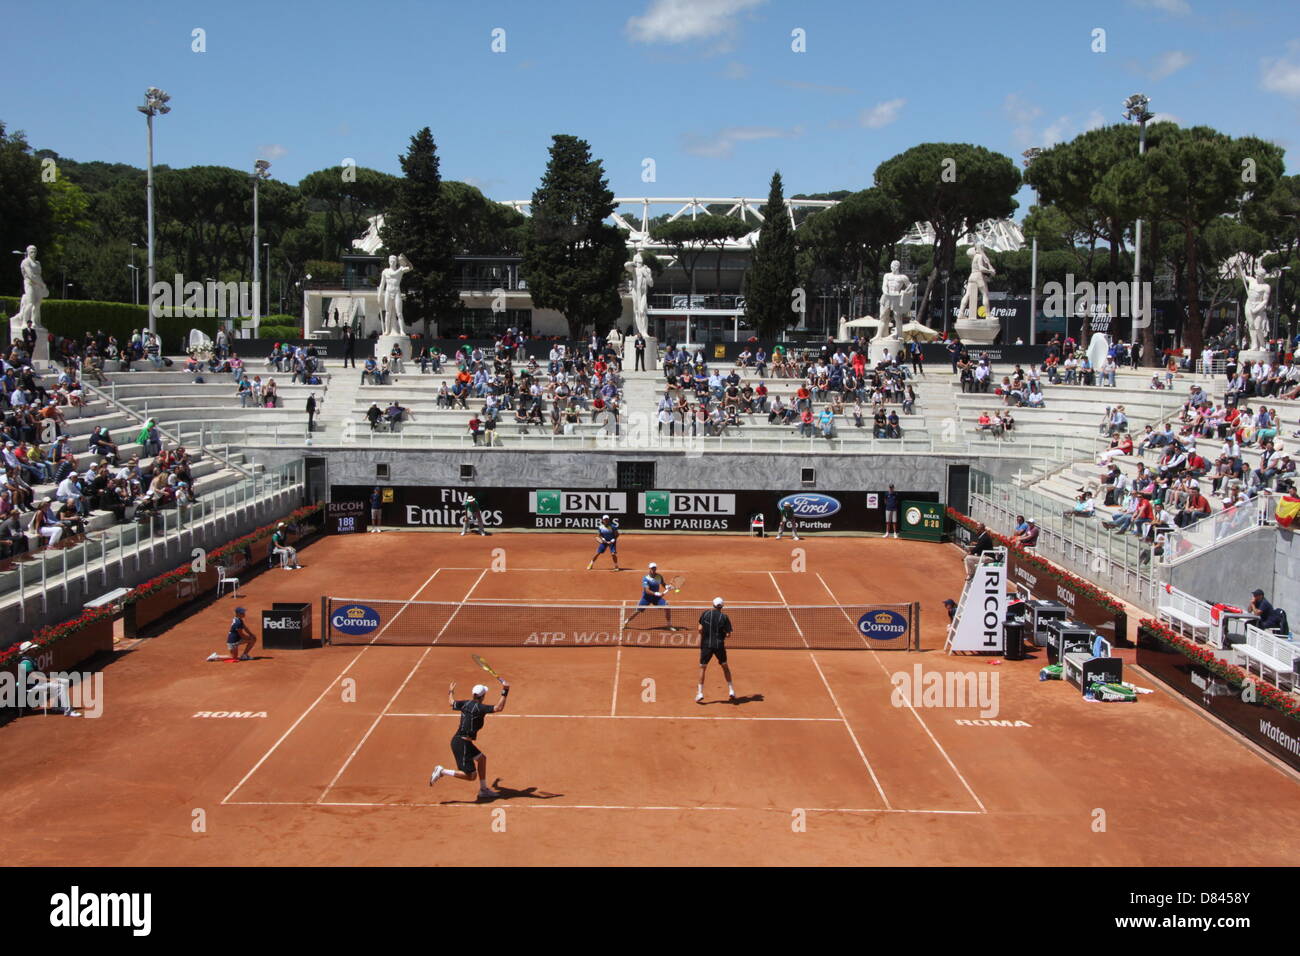 Rome, Italy. 17 May 2013 Scene at the atp masters tennis tournament in rome,  italy Stock Photo - Alamy